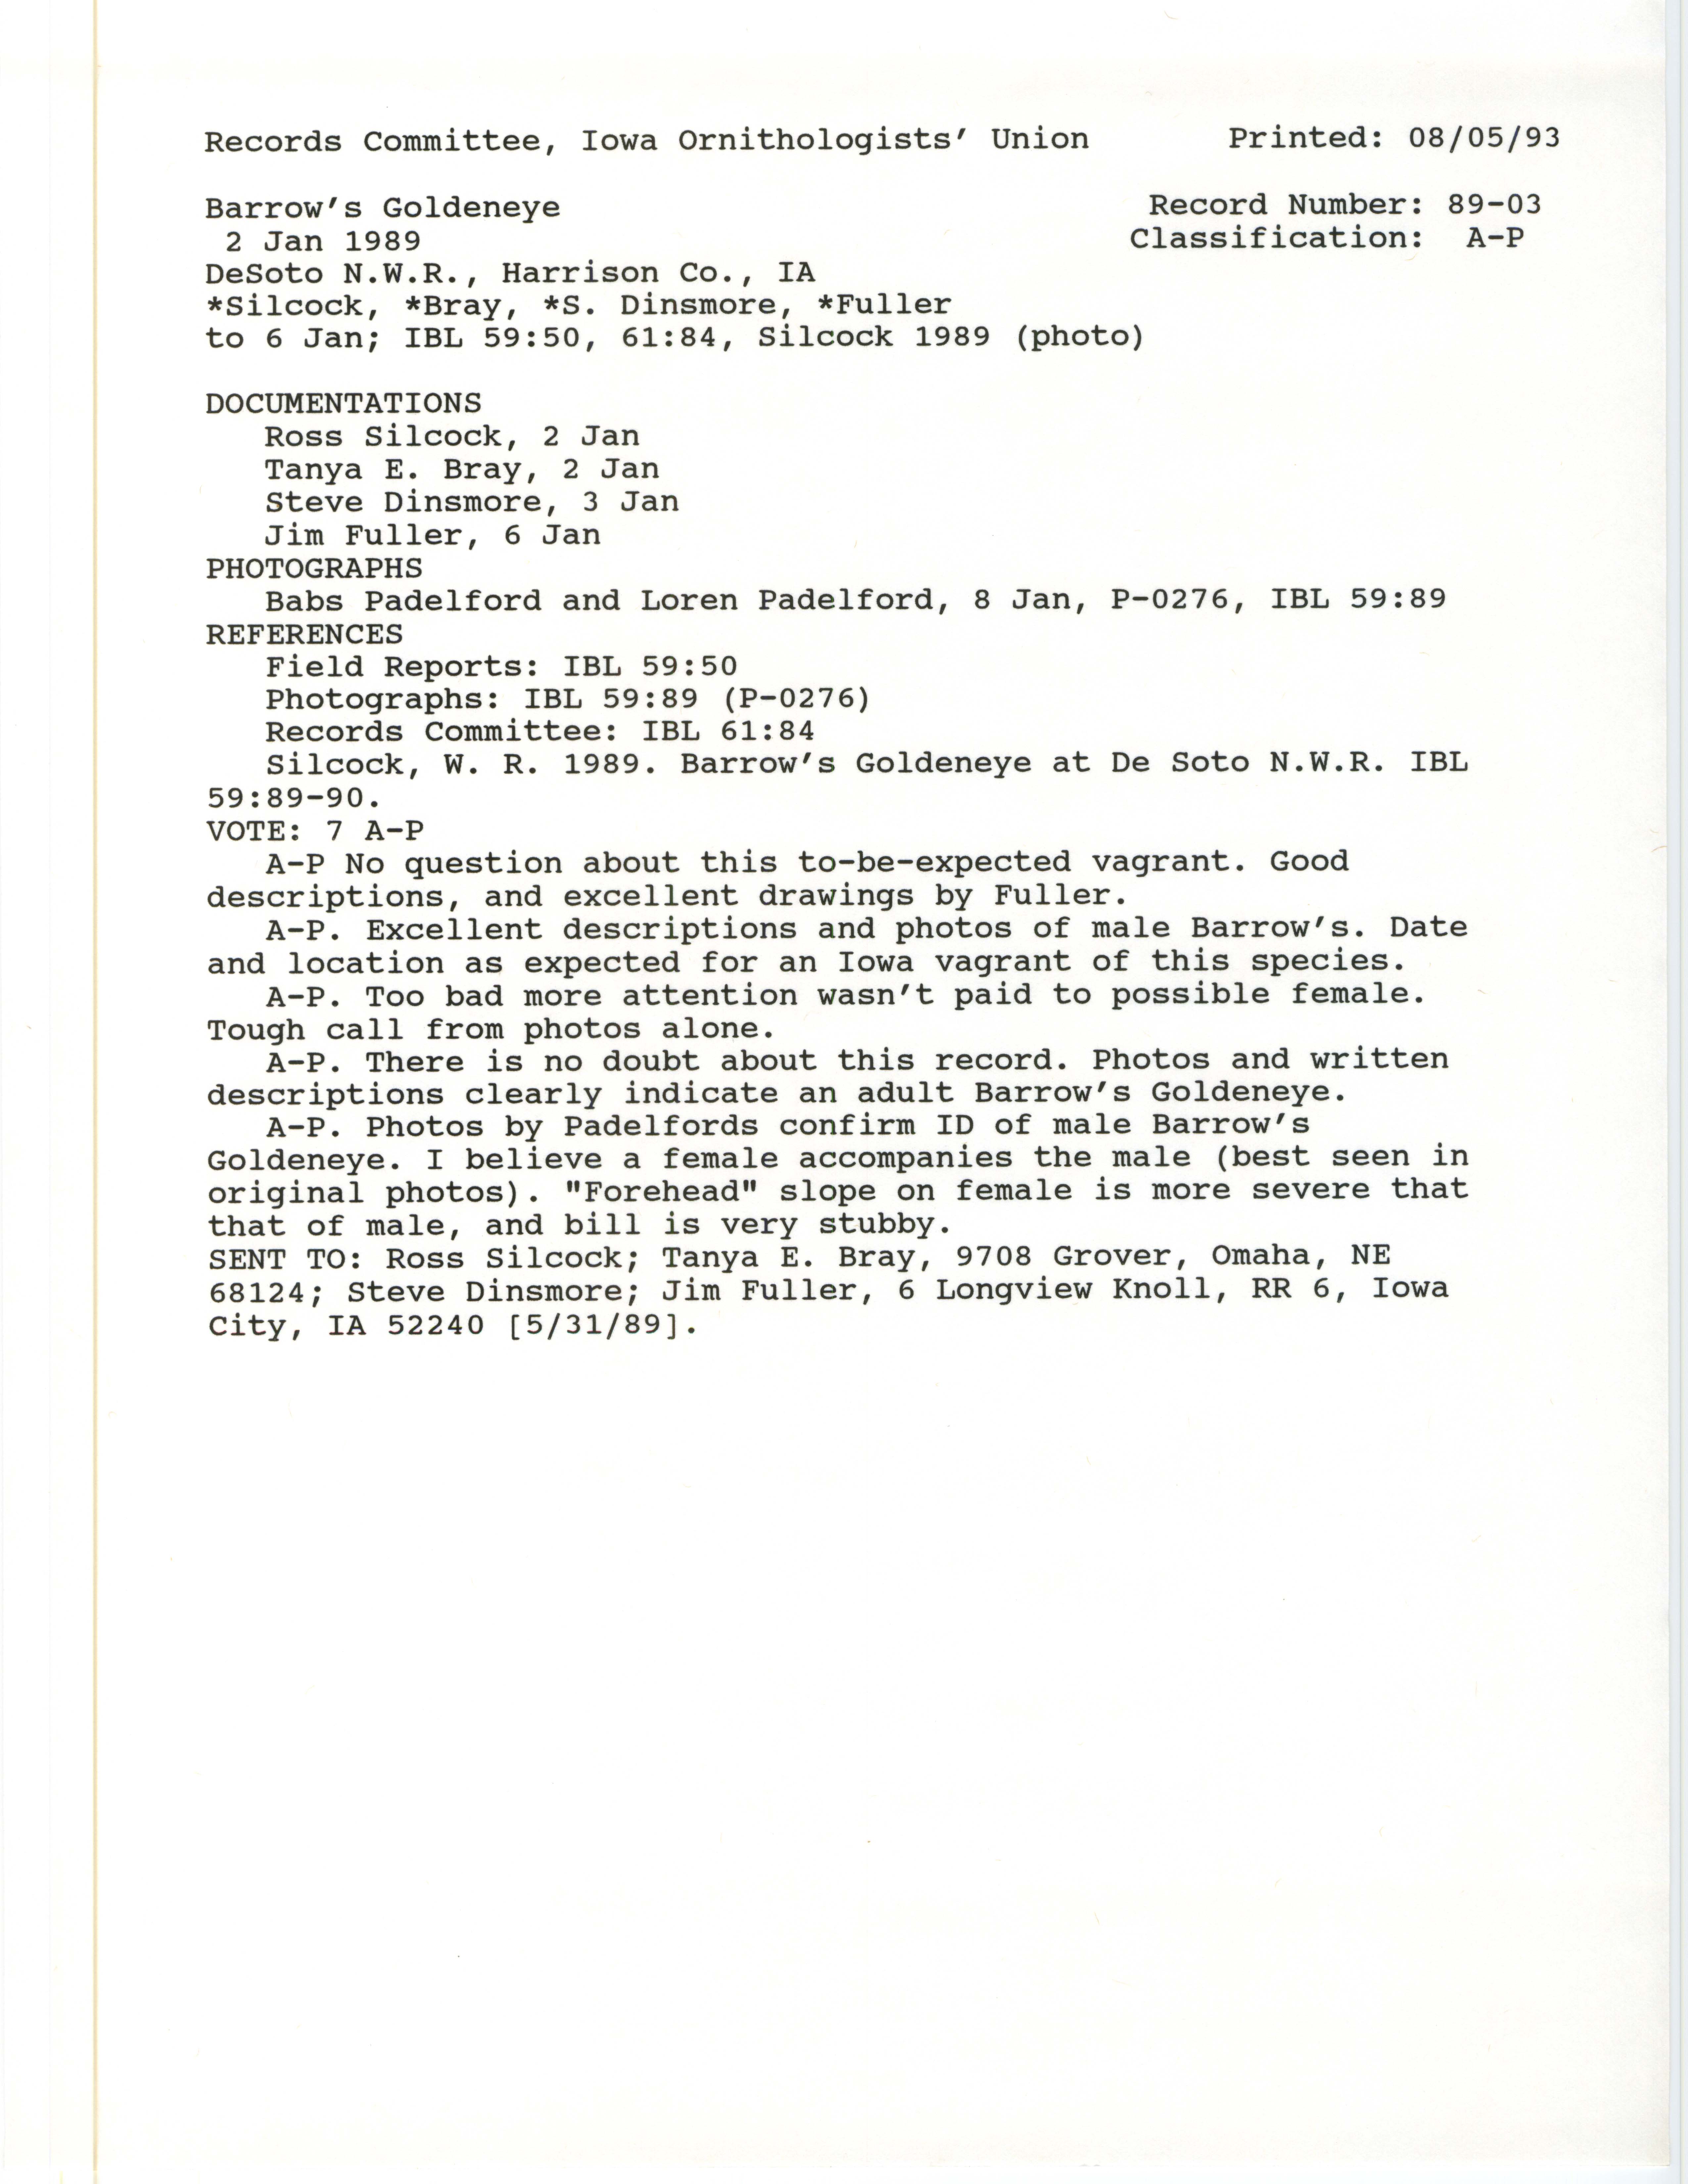 Records Committee review for rare bird sighting for Barrow's Goldeneye at DeSoto National Wildlife Refuge, 1989